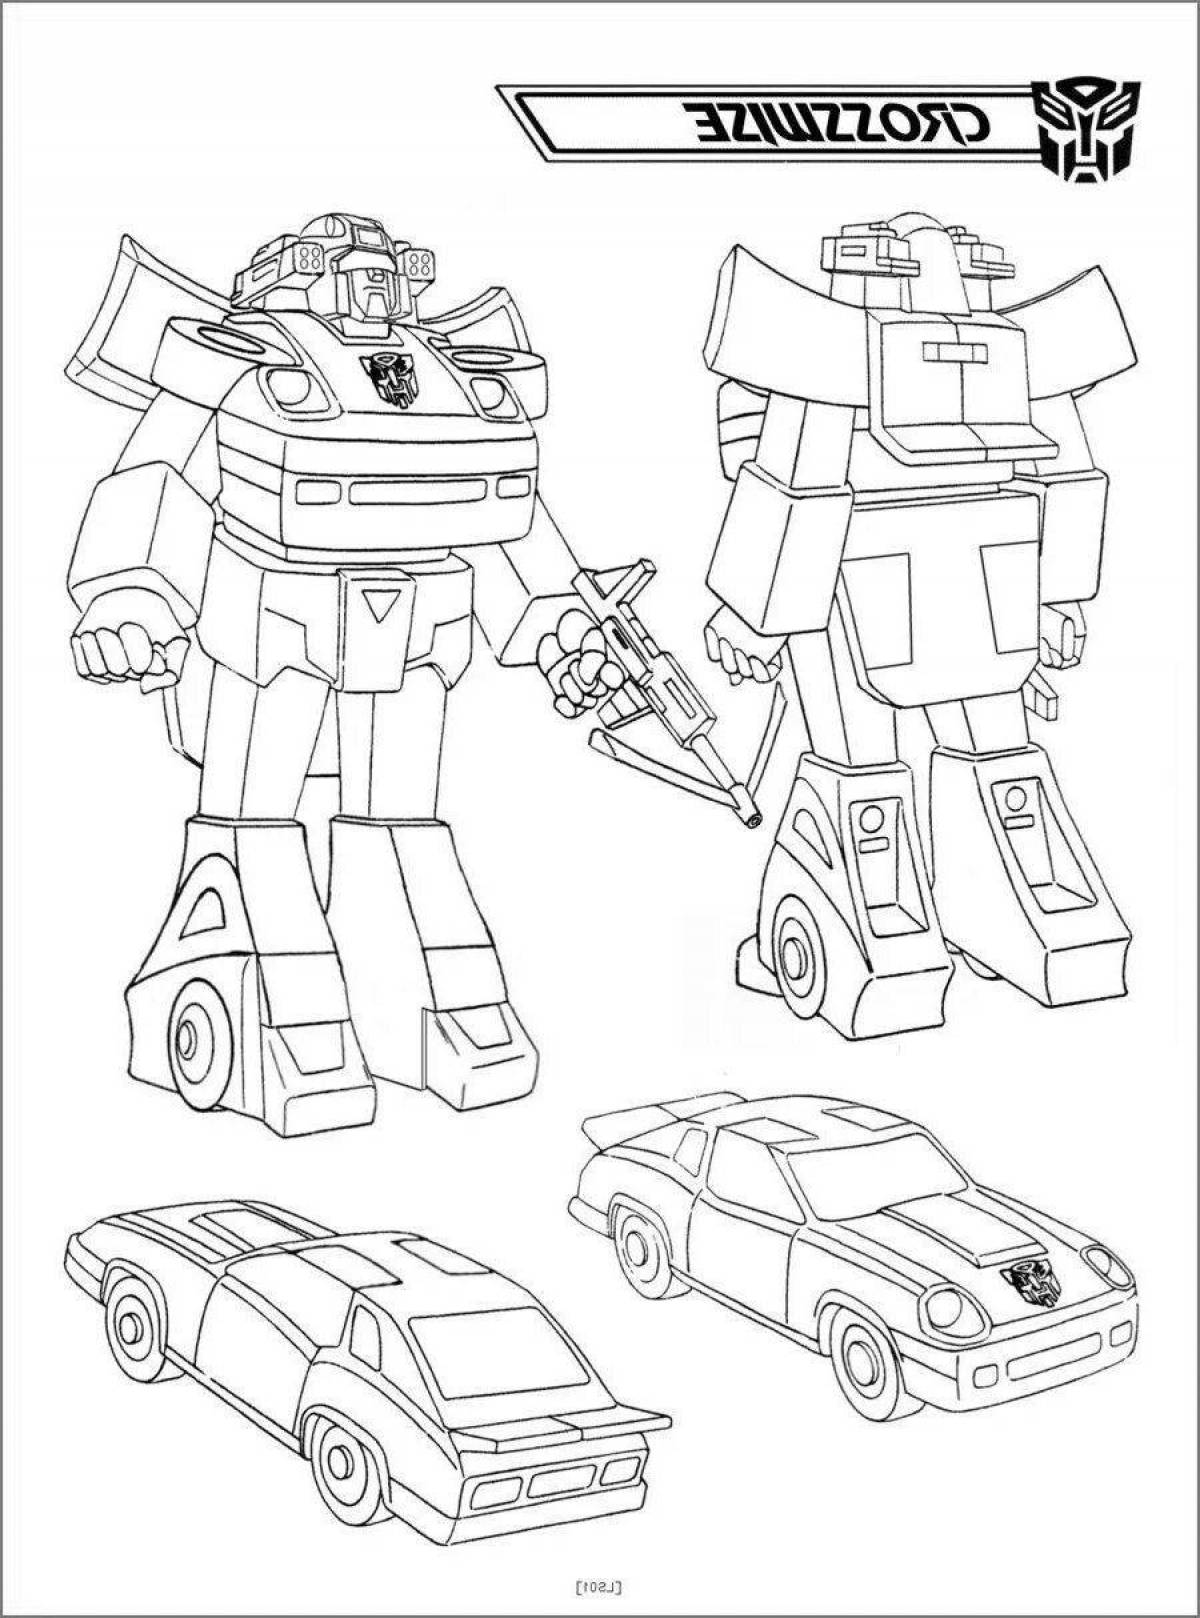 Awesome master vi tobot coloring page